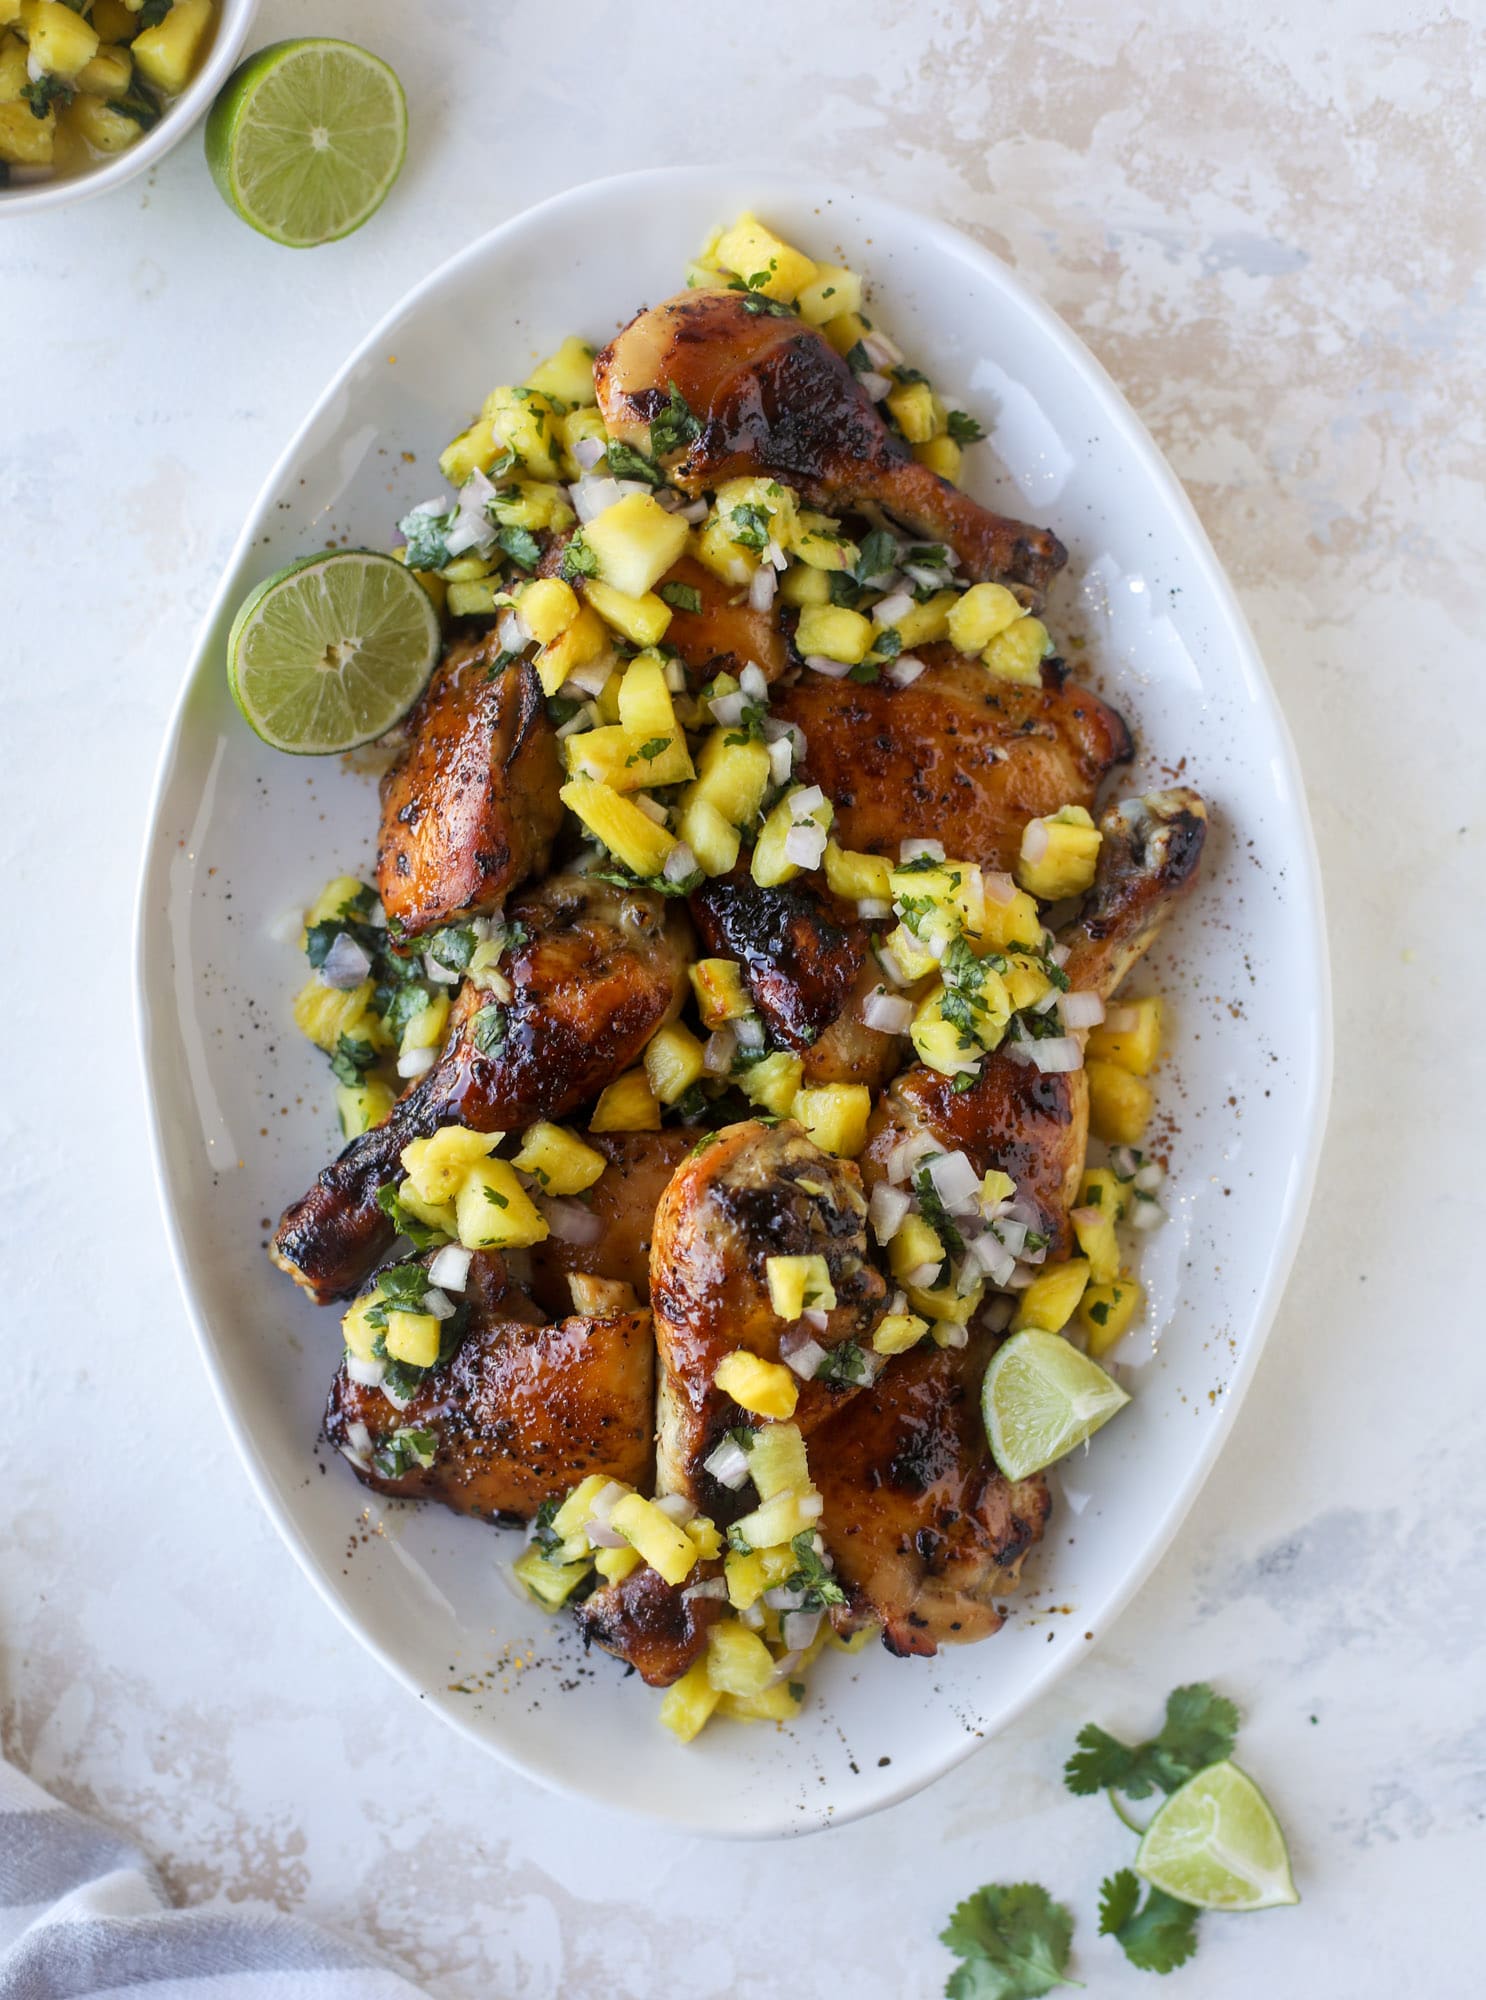 This sticky chicken recipe is made on a sheet pan and roasted until flavorfor and sticky with sauce, then served with pineapple salsa. It